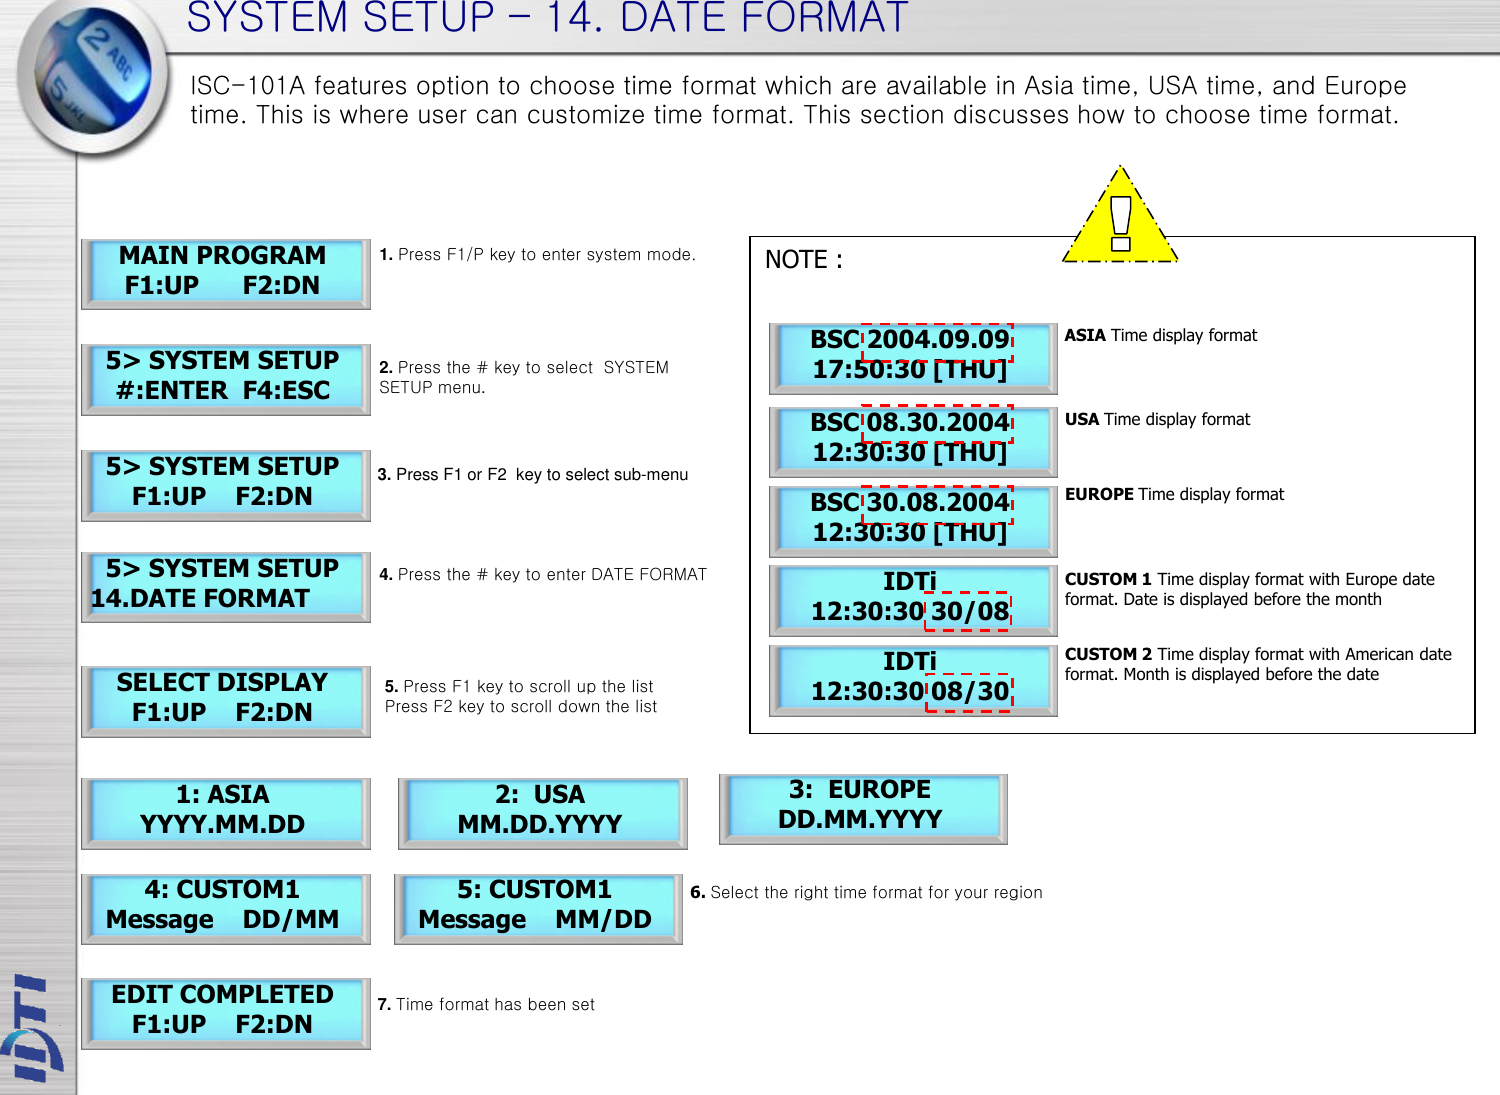 SYSTEM SETUP – 14. DATE FORMAT 5&gt; SYSTEM SETUP 14.DATE FORMAT SELECT DISPLAY F1:UP    F2:DN MAIN PROGRAM F1:UP      F2:DN 5&gt; SYSTEM SETUP #:ENTER  F4:ESC 5&gt; SYSTEM SETUP F1:UP    F2:DN 1: ASIA YYYY.MM.DD EDIT COMPLETED F1:UP    F2:DN 2:  USA MM.DD.YYYY 3:  EUROPE DD.MM.YYYY 4: CUSTOM1 Message    DD/MM 5: CUSTOM1 Message    MM/DD NOTE :           BSC 2004.09.09 17:50:30 [THU] BSC 08.30.2004 12:30:30 [THU] BSC 30.08.2004 12:30:30 [THU] IDTi 12:30:30 30/08 IDTi 12:30:30 08/30 ASIA Time display format USA Time display format EUROPE Time display format CUSTOM 1 Time display format with Europe date format. Date is displayed before the month CUSTOM 2 Time display format with American date format. Month is displayed before the date ISC-101A features option to choose time format which are available in Asia time, USA time, and Europe time. This is where user can customize time format. This section discusses how to choose time format. 1. Press F1/P key to enter system mode. 2. Press the # key to select  SYSTEM SETUP menu. 4. Press the # key to enter DATE FORMAT 3. Press F1 or F2  key to select sub-menu 5. Press F1 key to scroll up the list  Press F2 key to scroll down the list 6. Select the right time format for your region 7. Time format has been set 